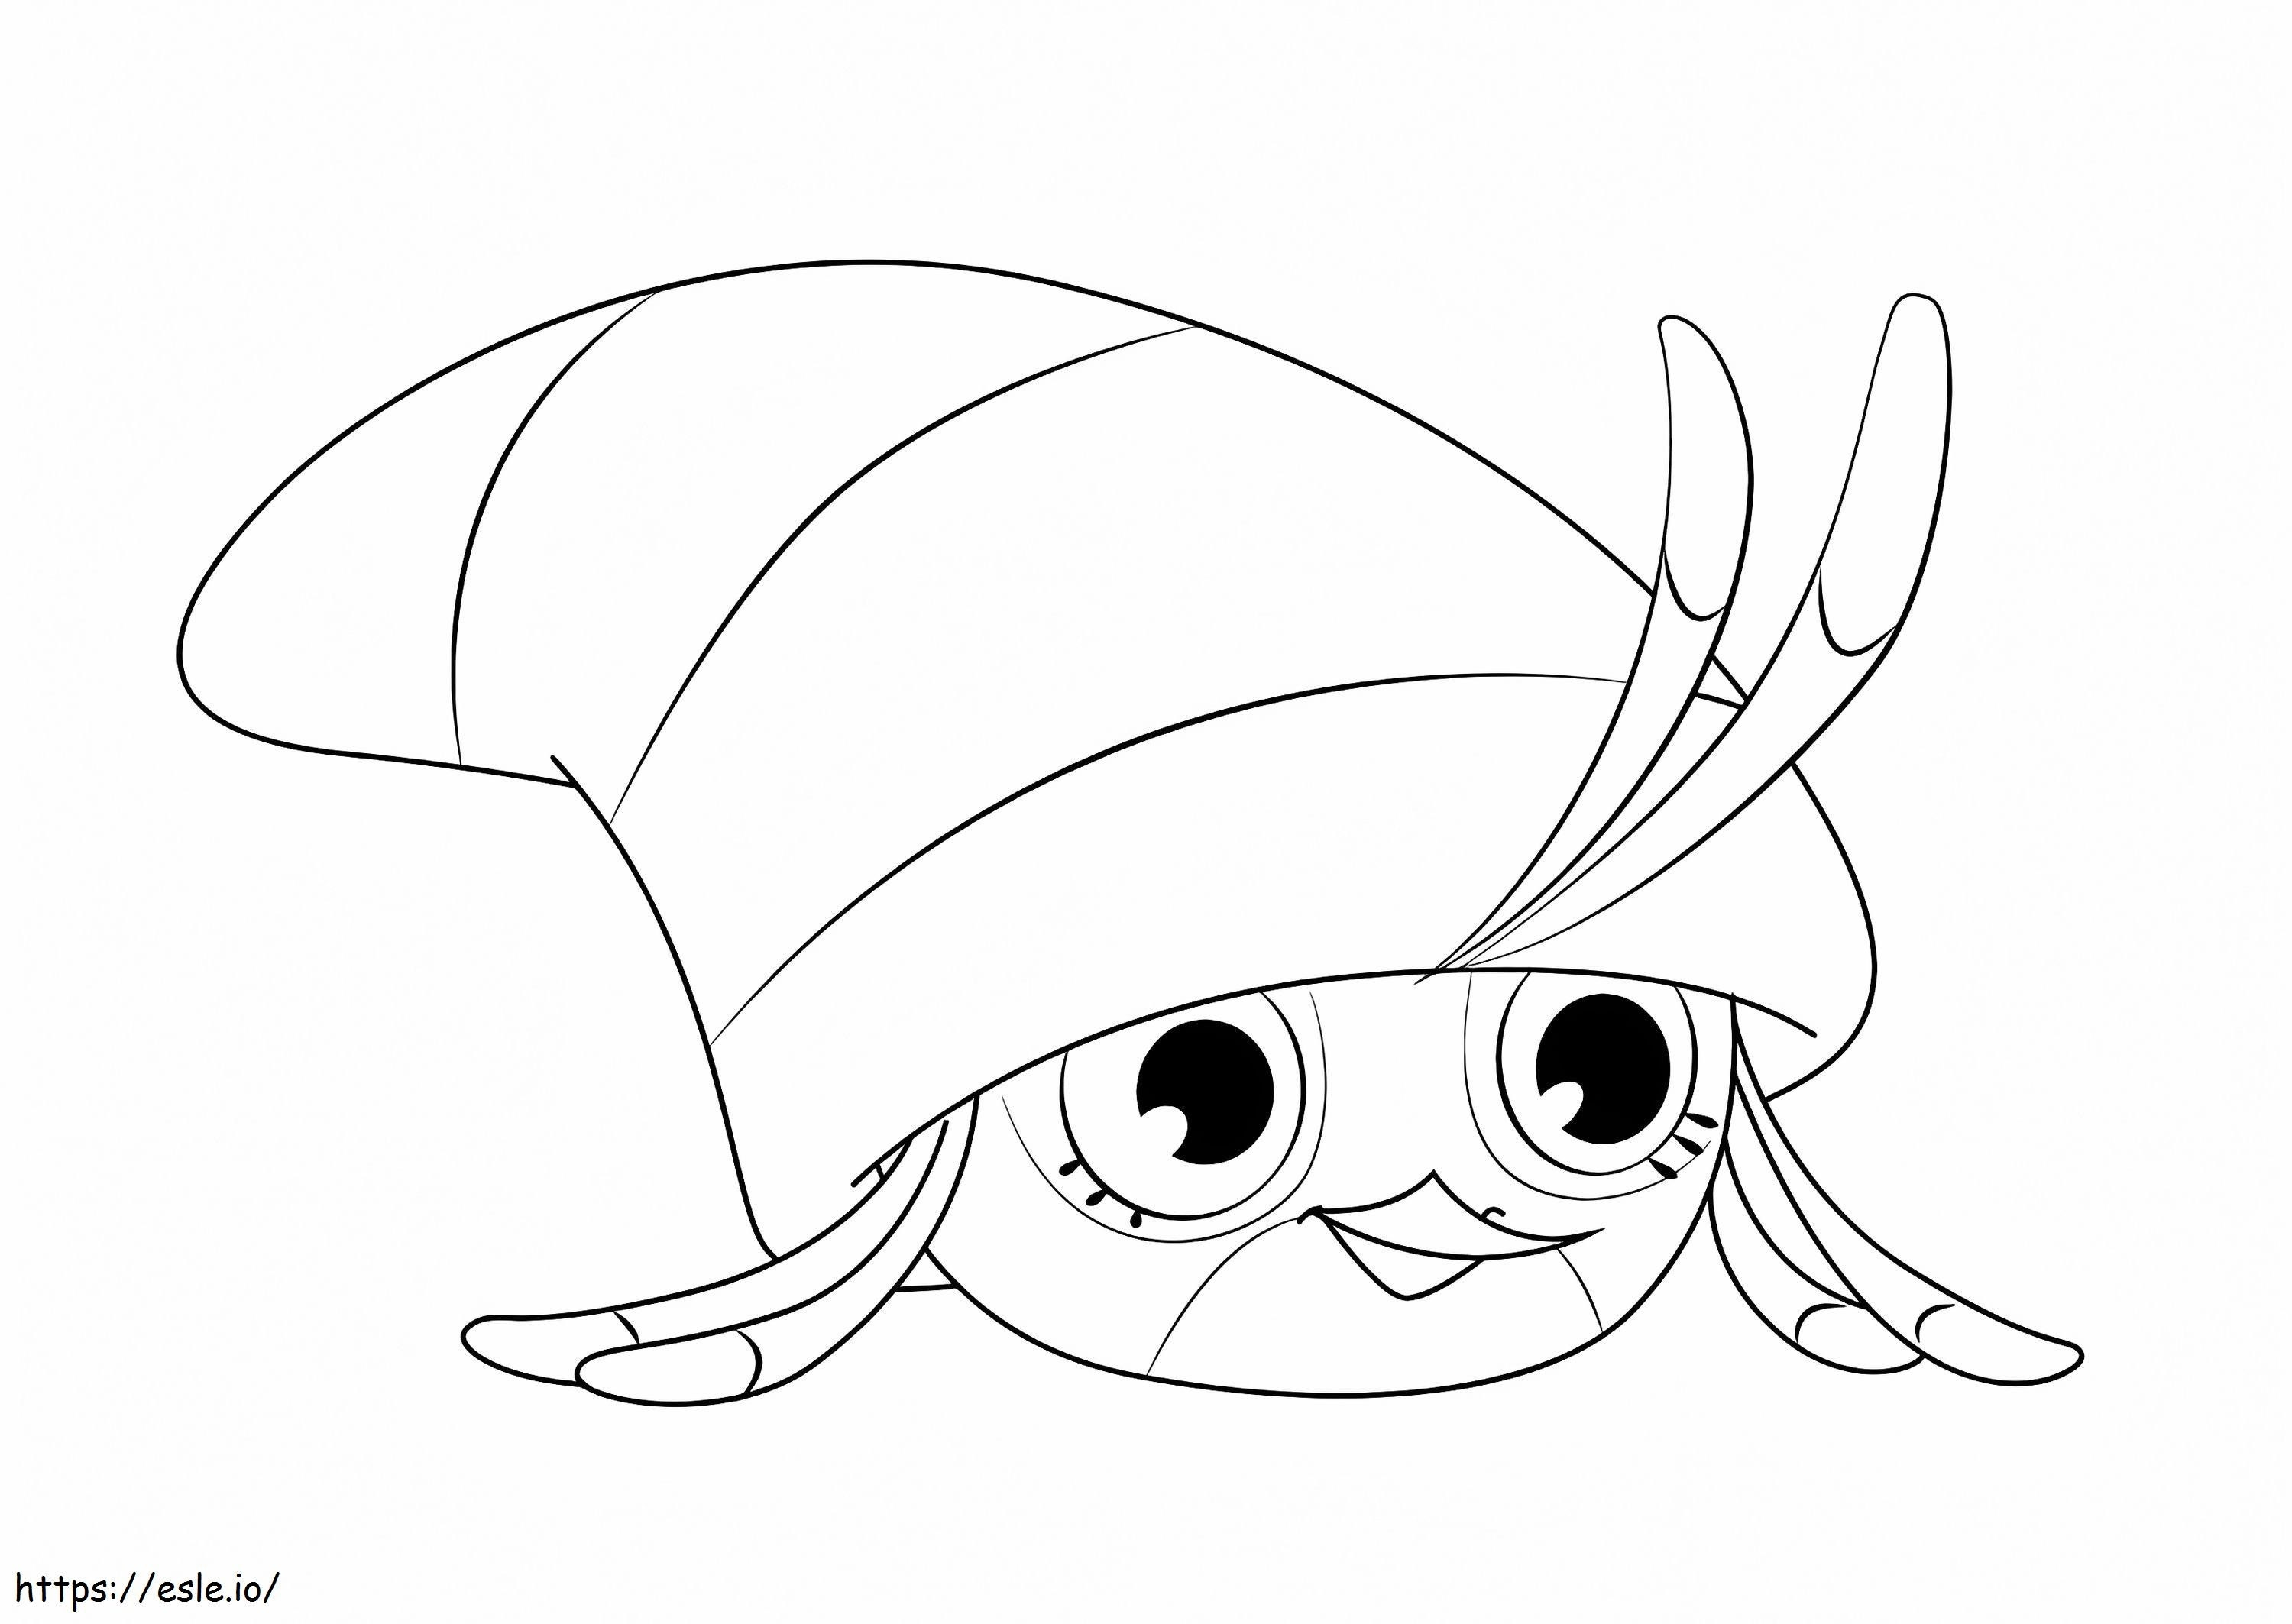 Baby Angry Birds Stella coloring page